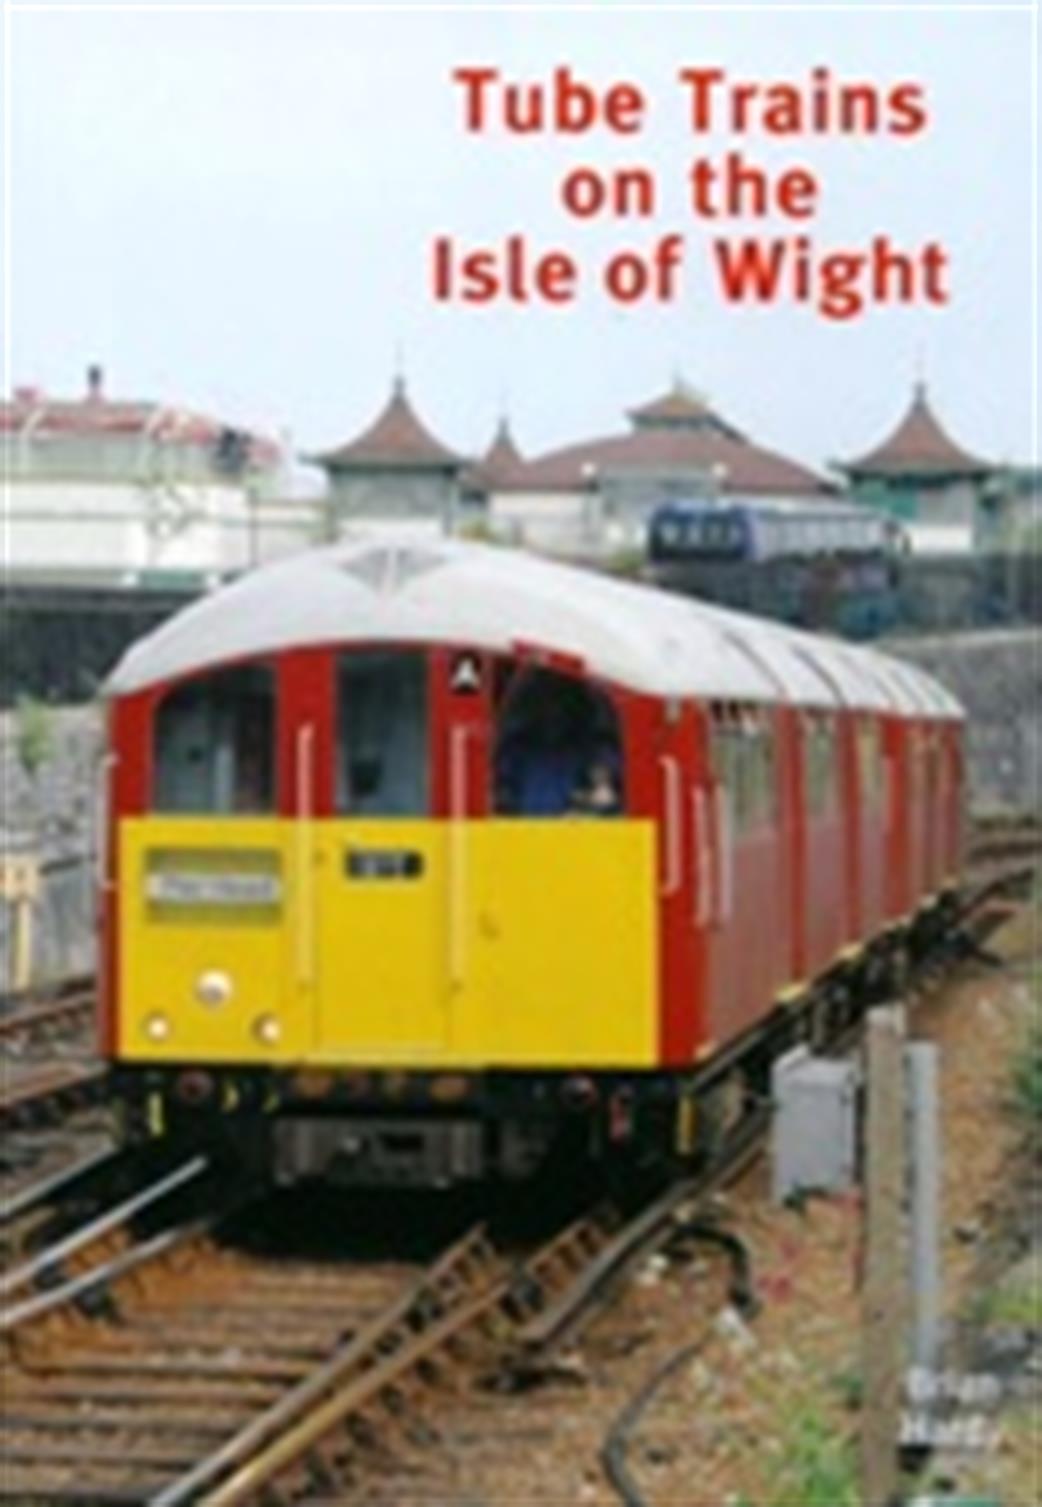 Capital Transport Publishing  9781845142764 Tube Trains on the Isle of Wight by Brian Hardy